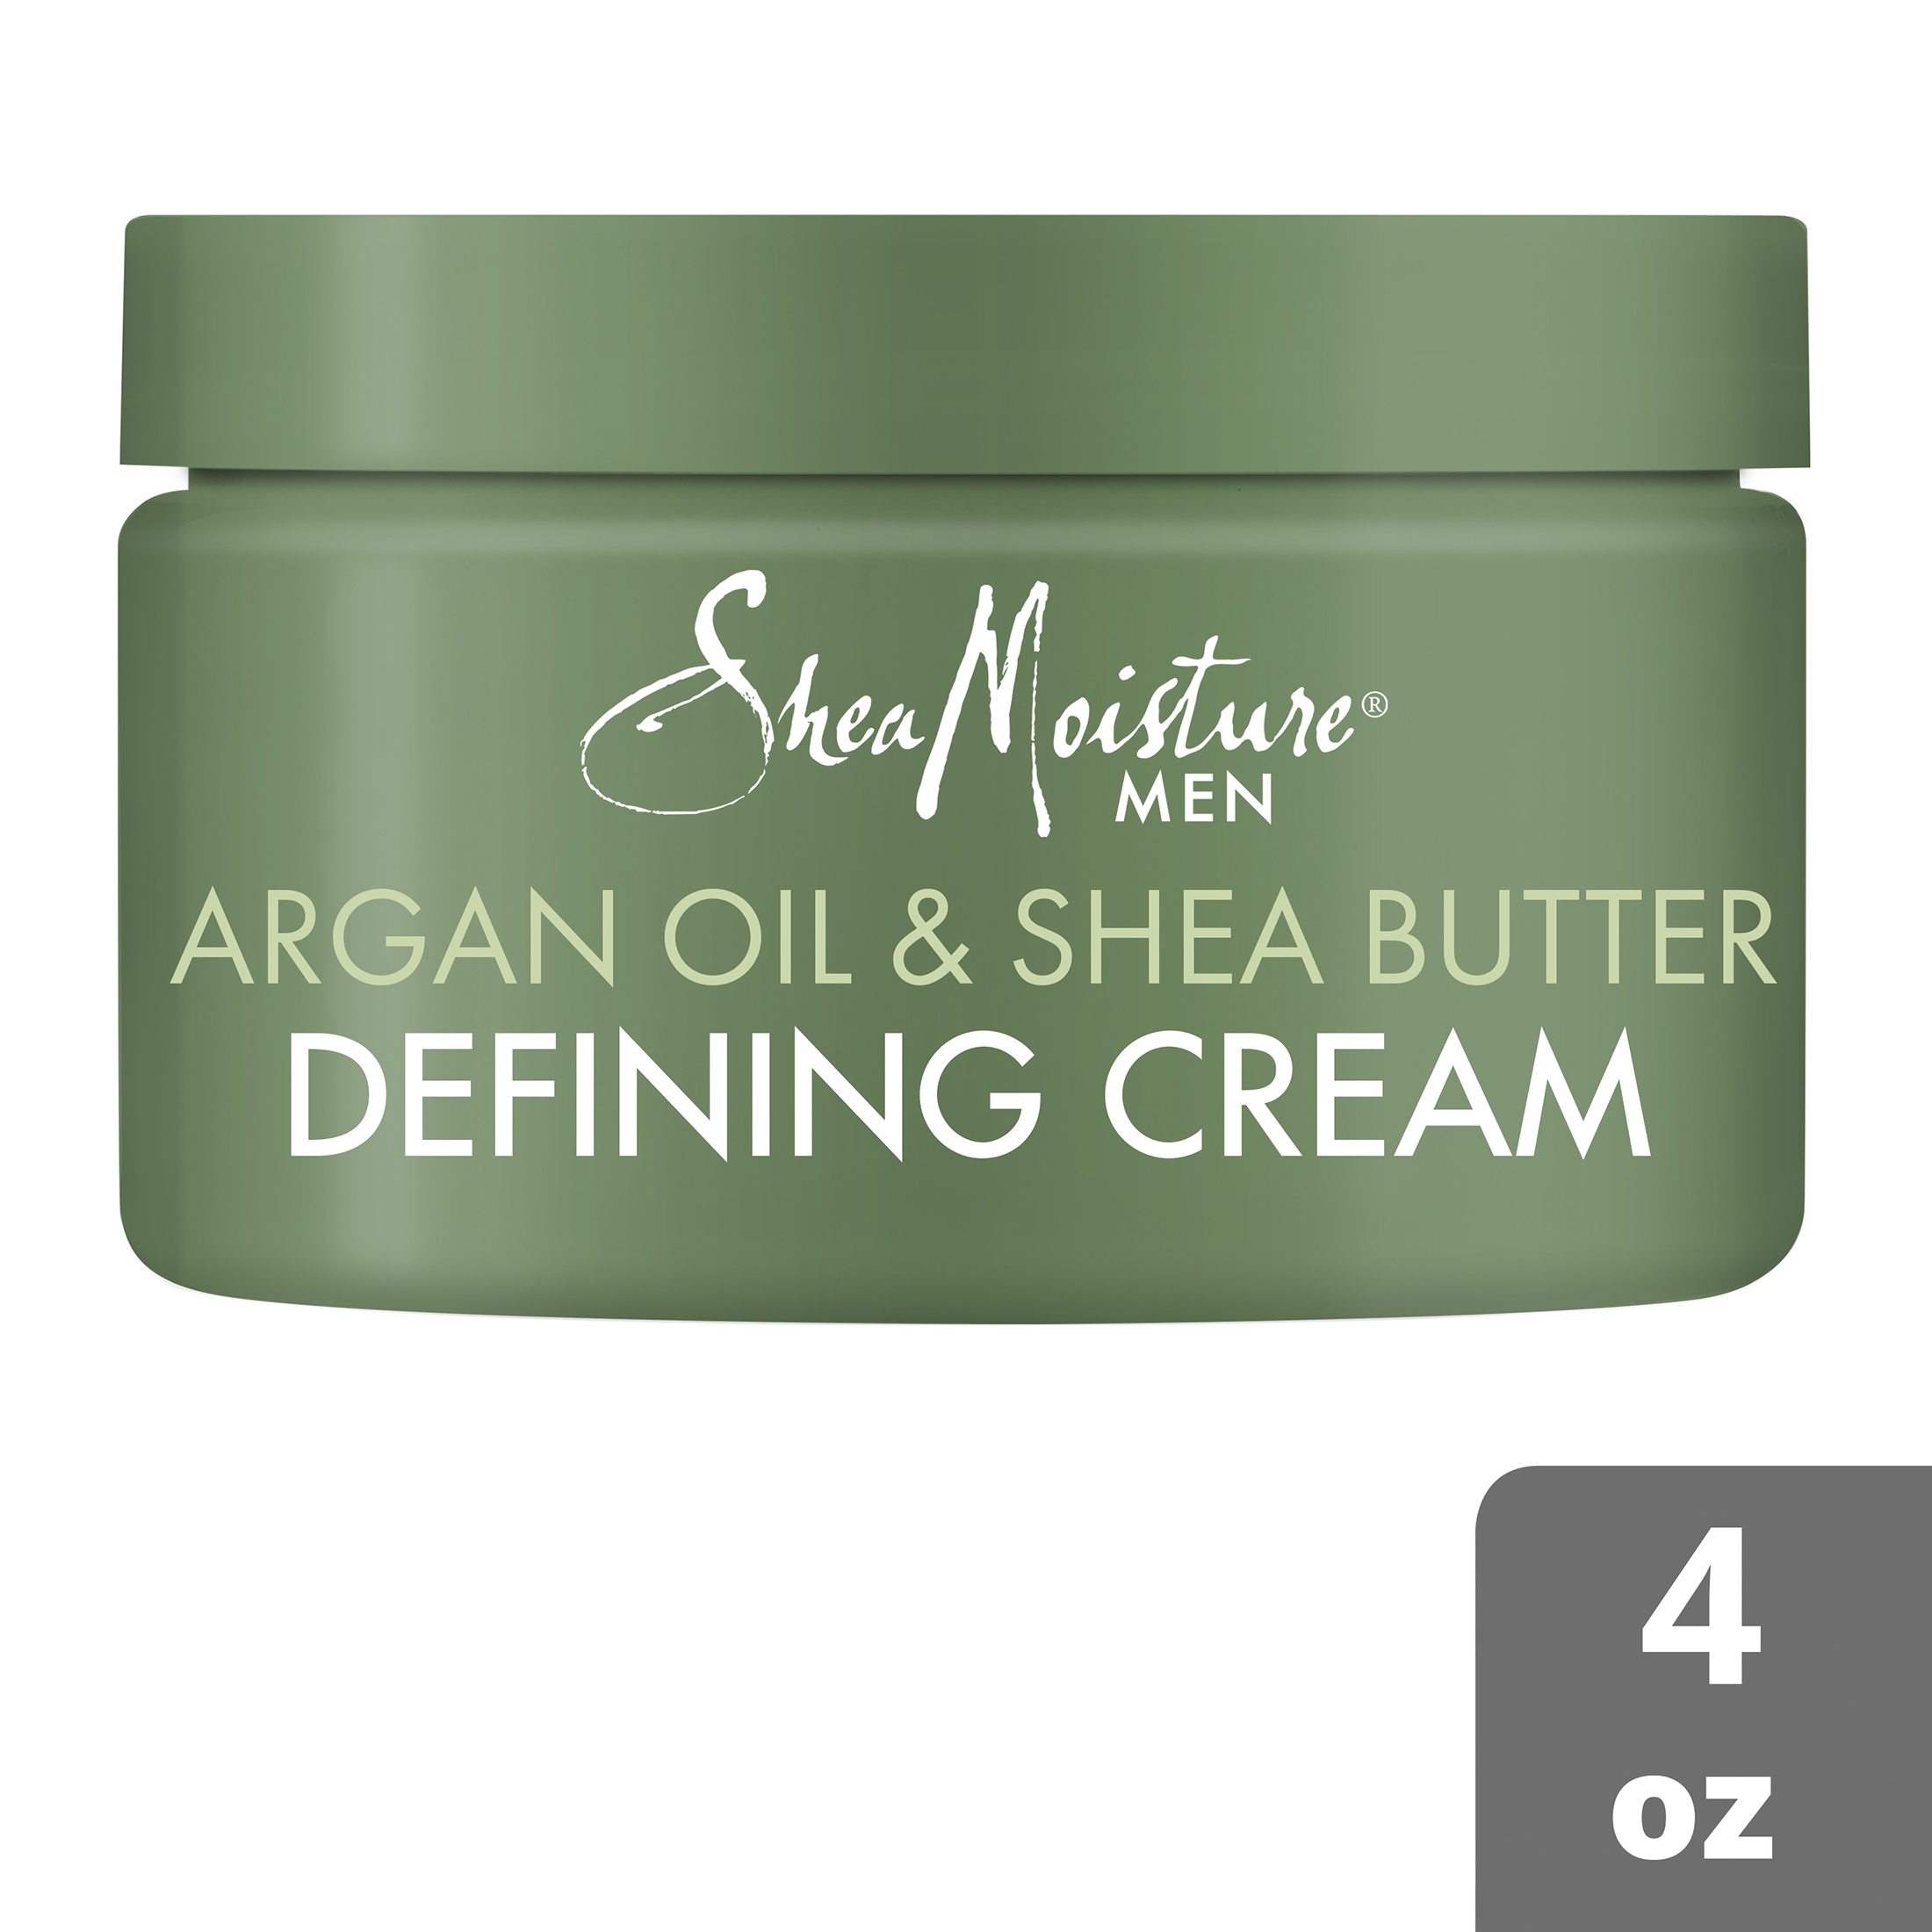 SheaMoisture Men's Defining Hair Cream Argan Oil and Shea for Curly Hair with Shea Butter 4 oz - image 2 of 9